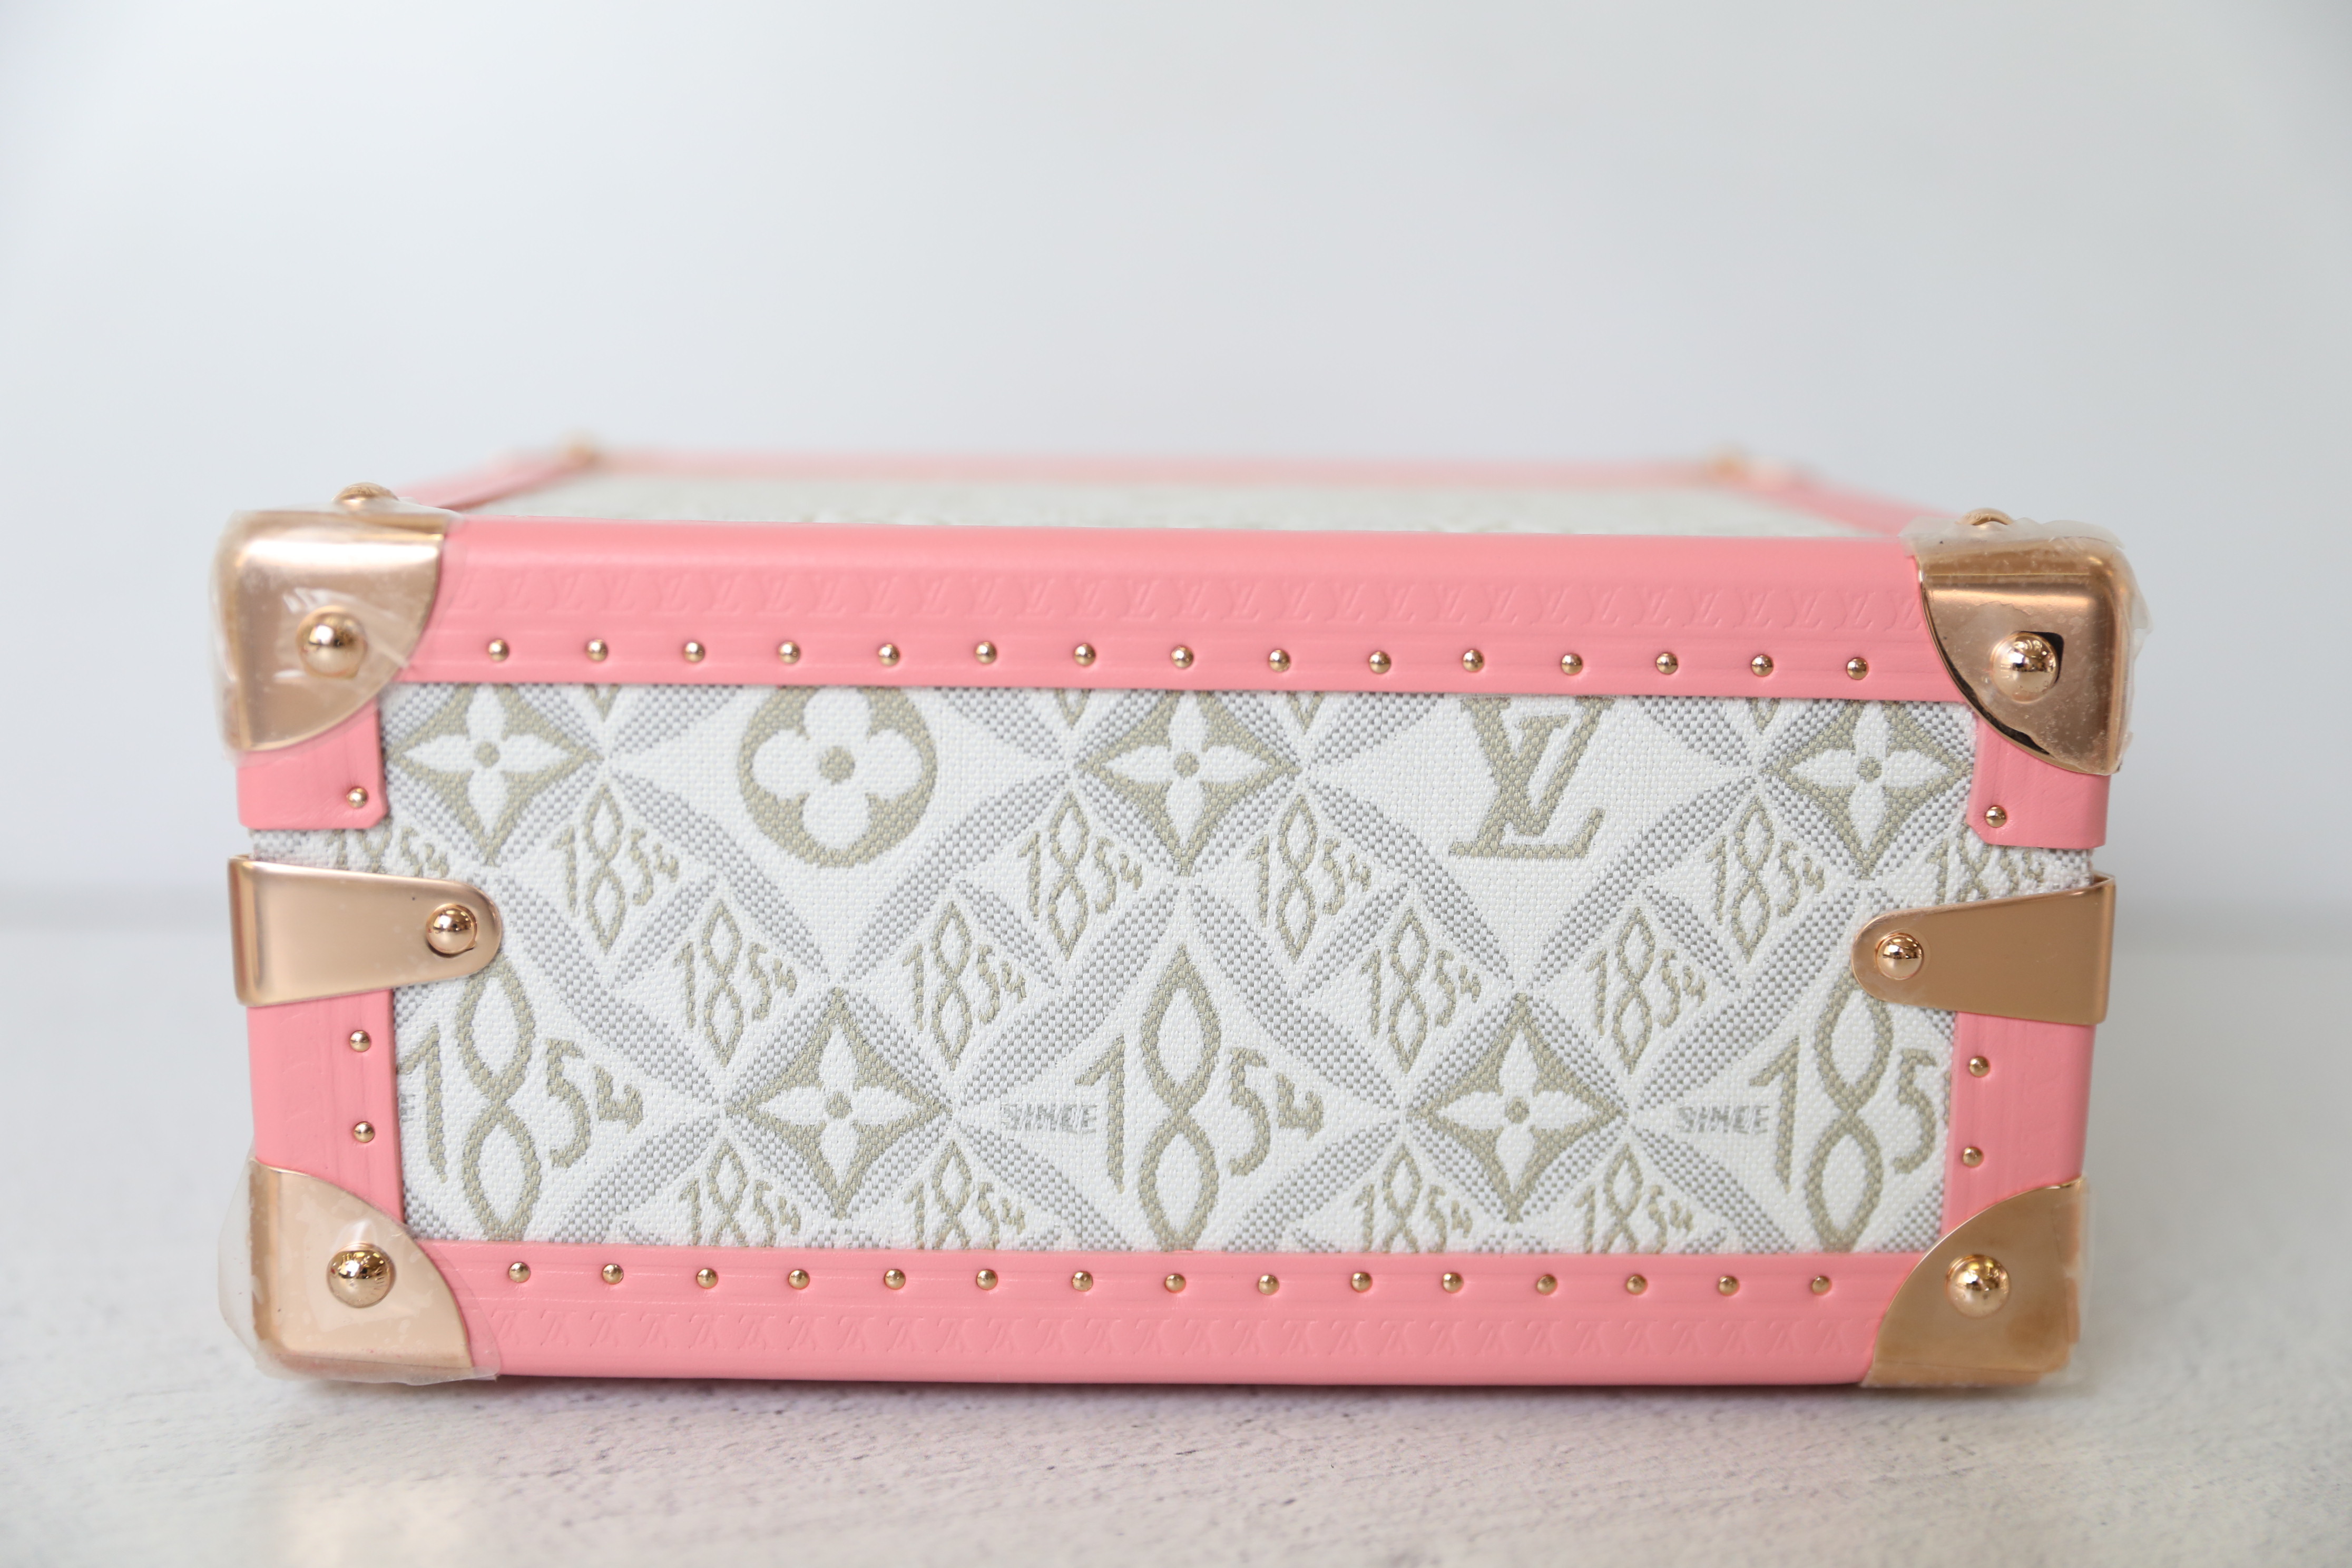 Louis Vuitton Since 1854 Trunk, Custom Pink and Grey, New in Box CMA001 -  Julia Rose Boston